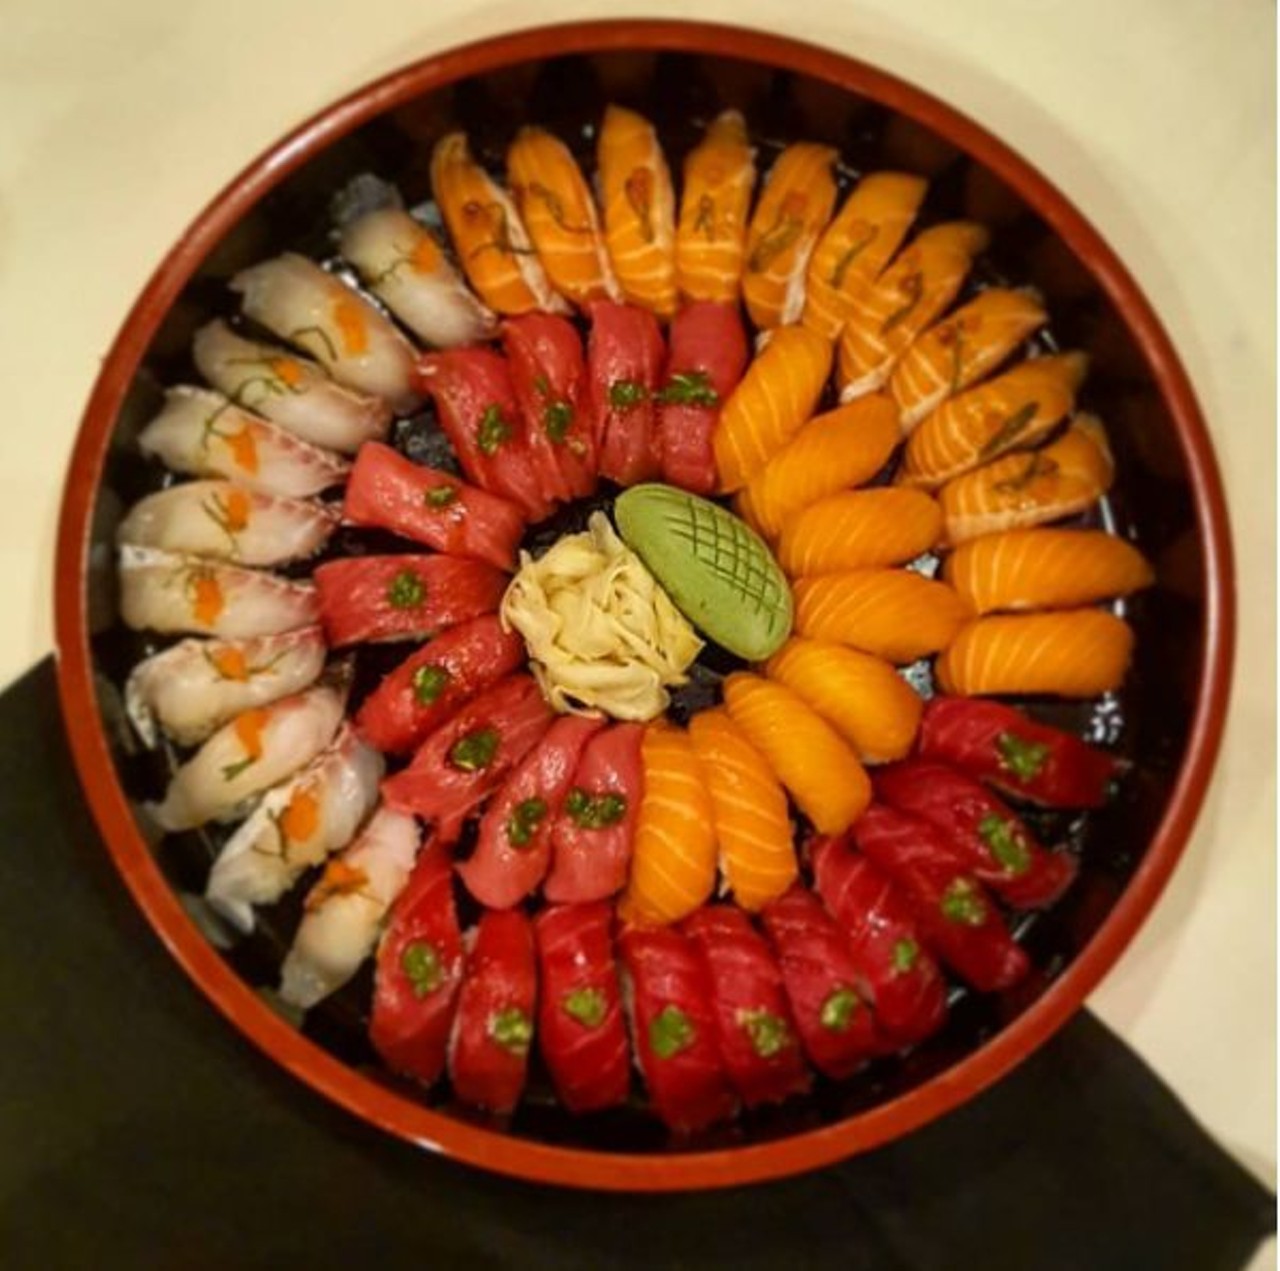 Sushihana Japanese Restaurant & Bar
1810 NW Military Hwy., (210) 340-7808
The only thing better than the ornate rolls available at Sushihana is the solid sake list that accompanies them. Go nuts. 
Photo via Instagram, tha.rami